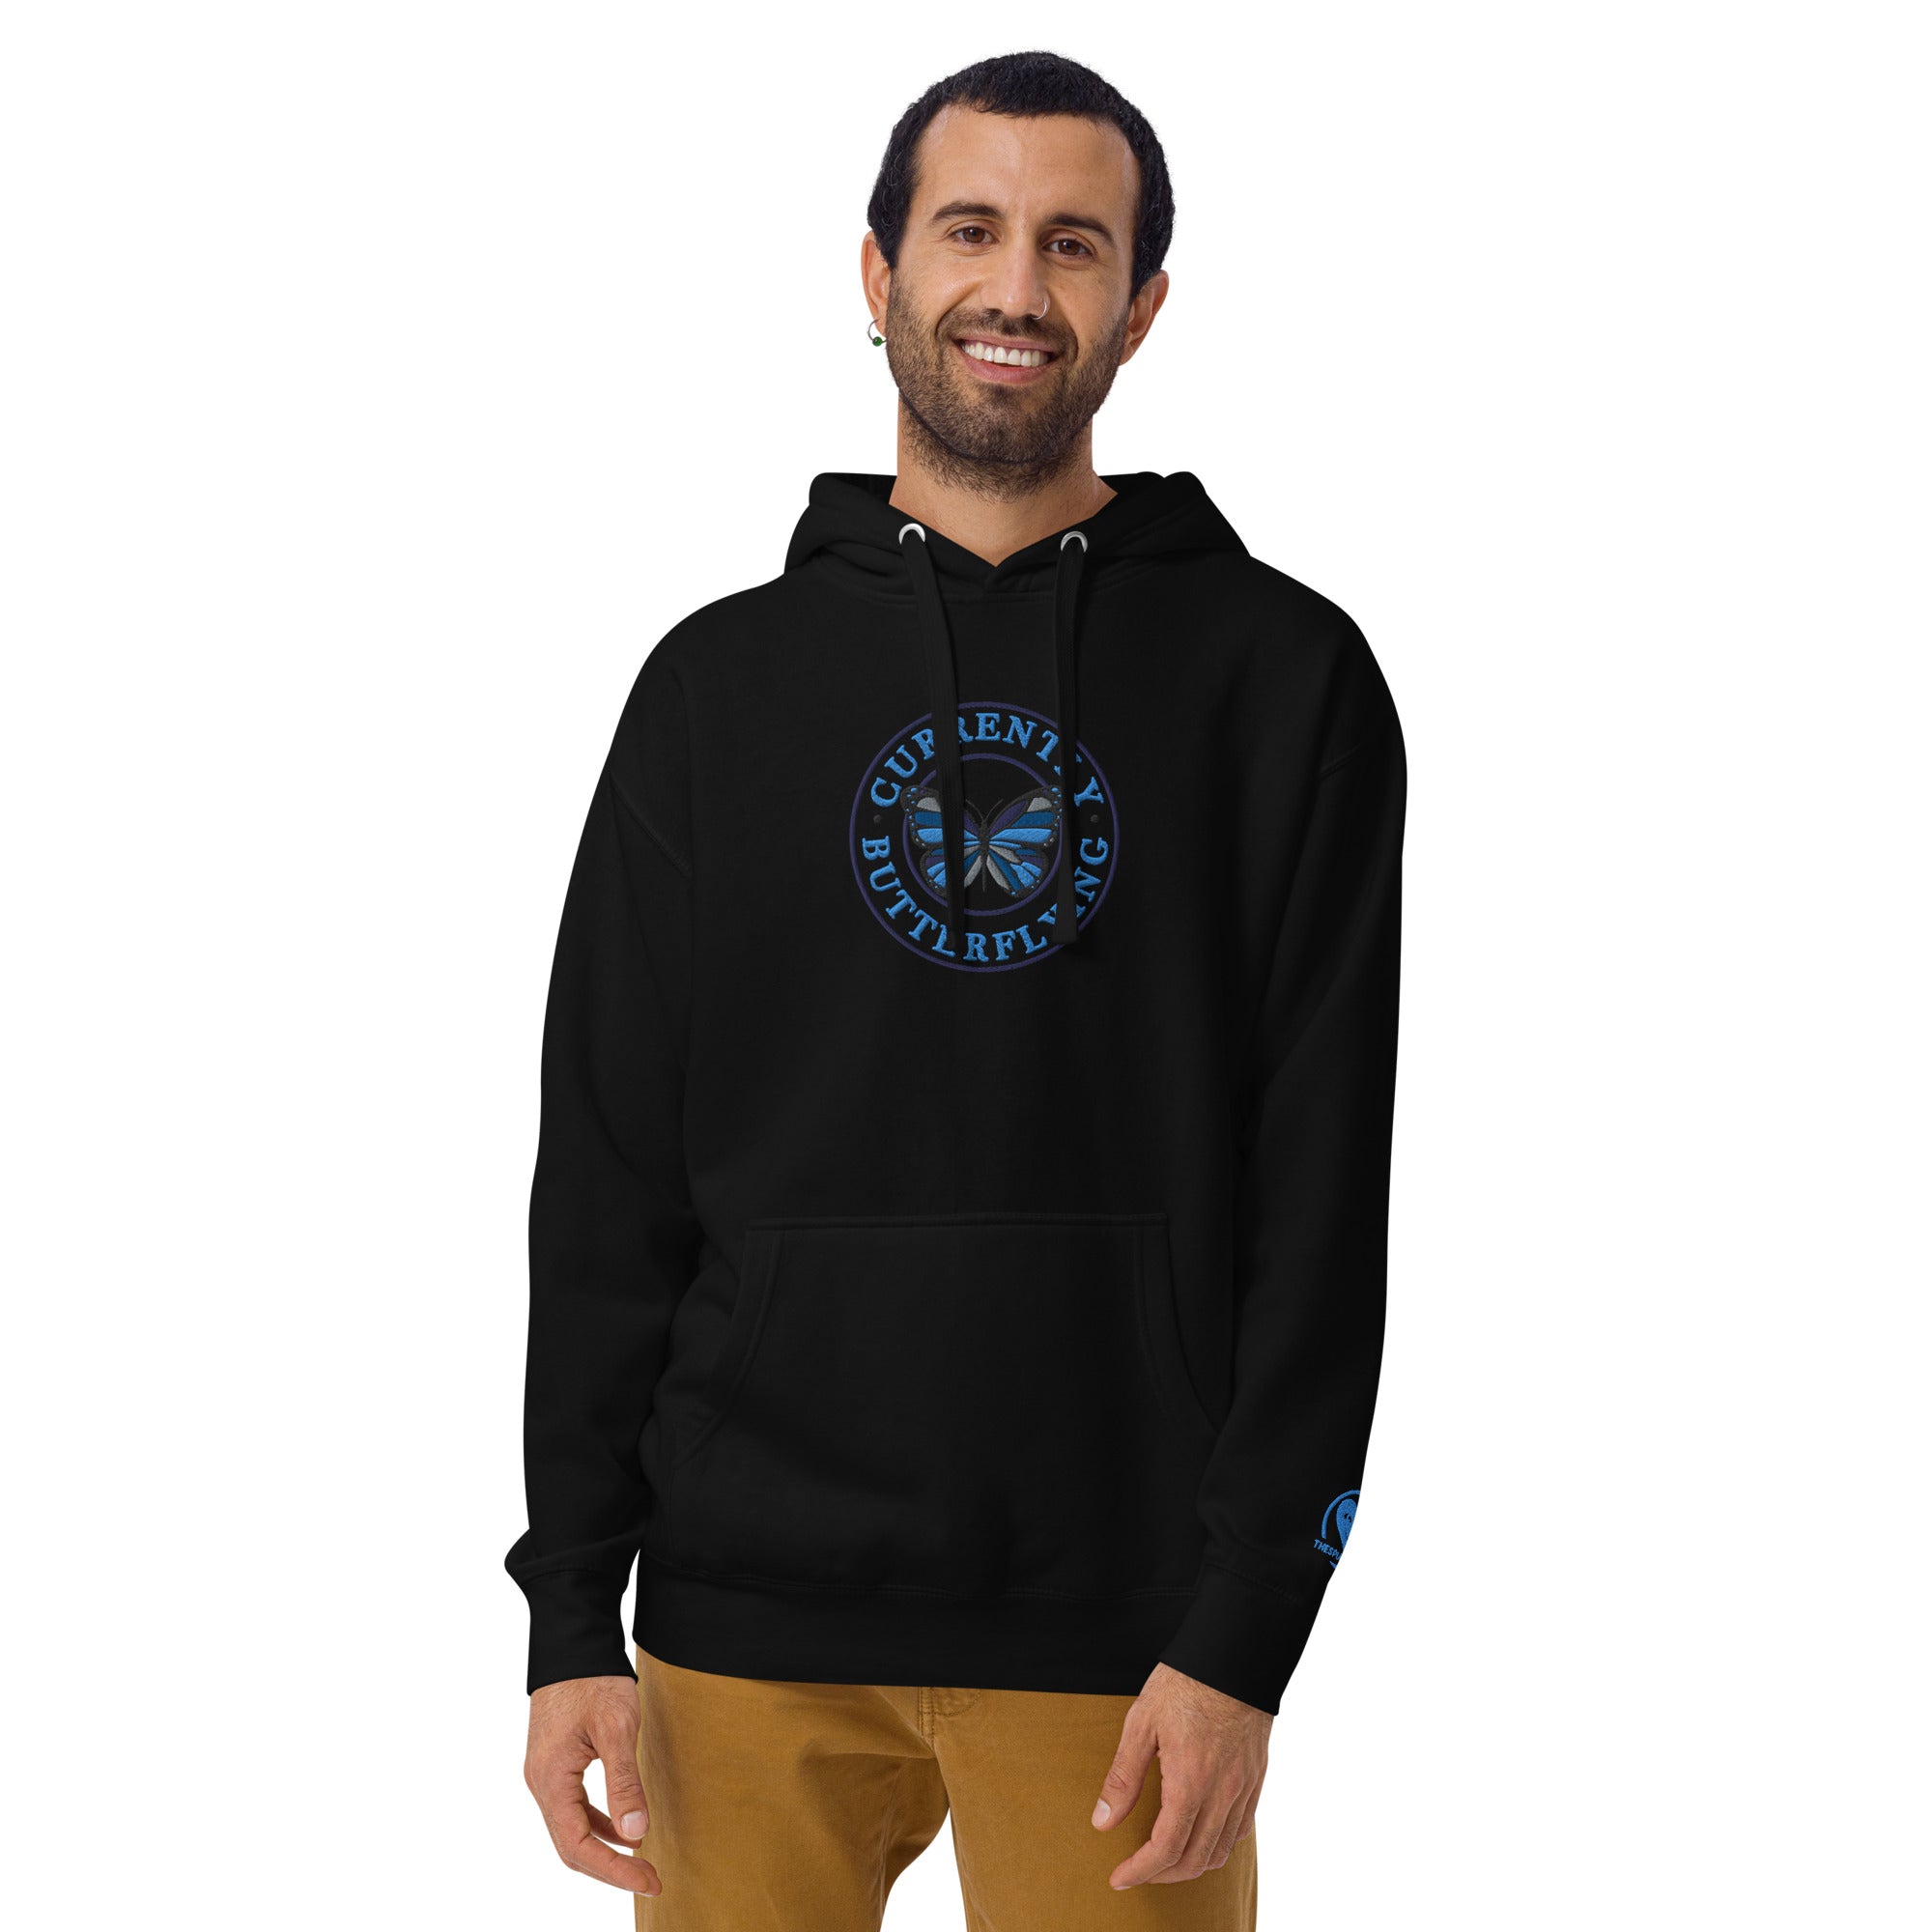 Currently Butterlying -  Embroidered Premium Unisex Hoodie